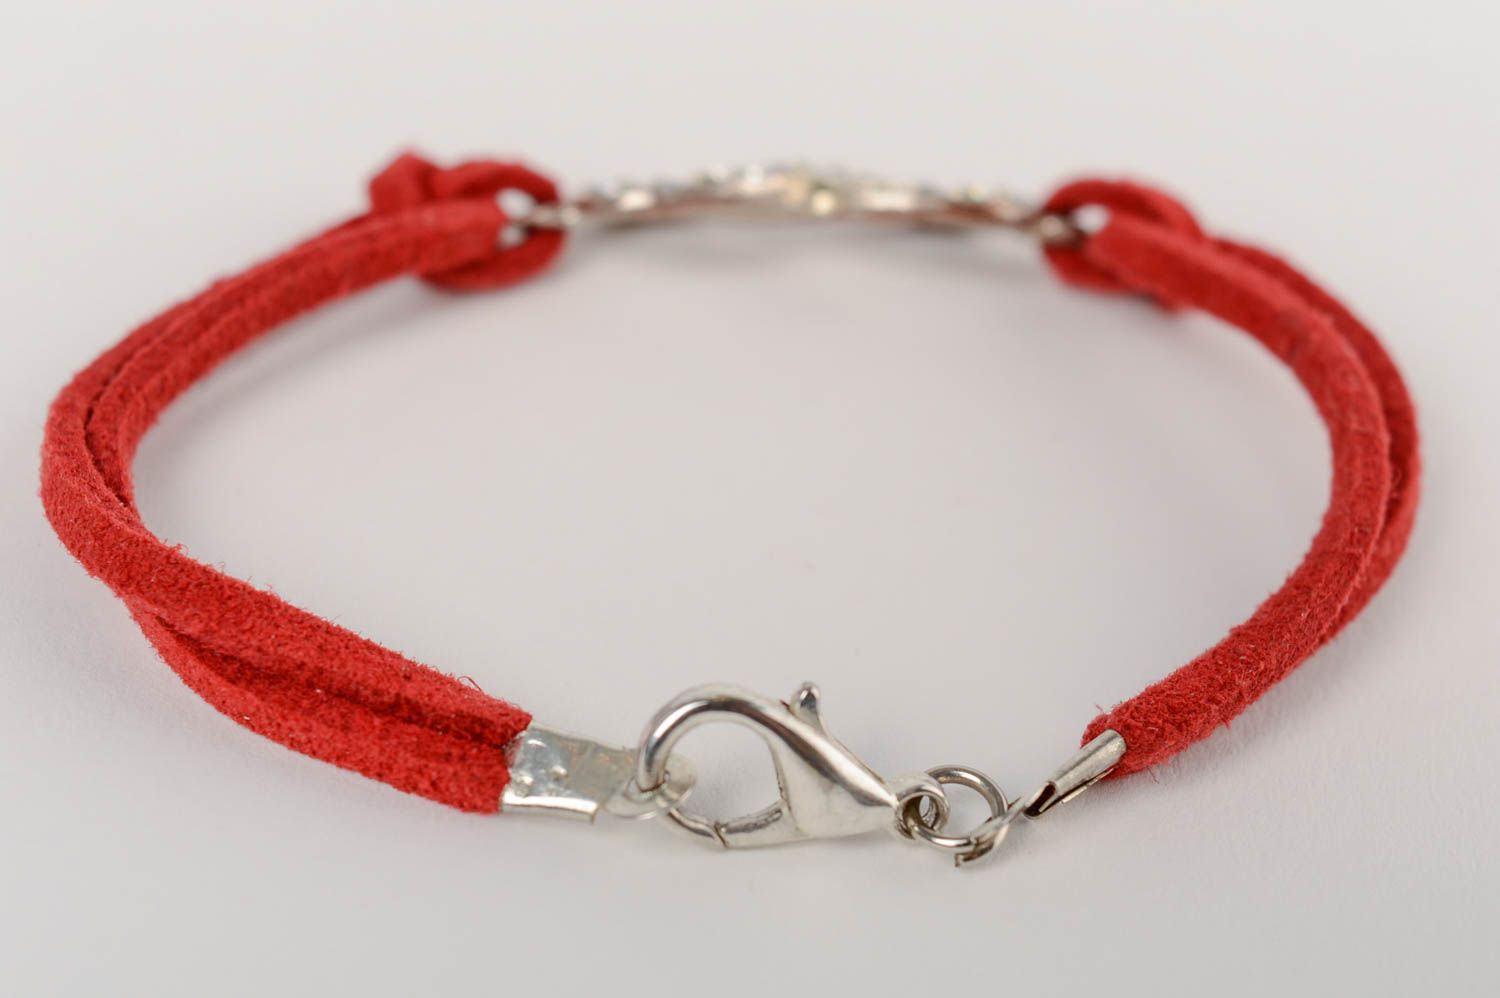 Handmade thin red suede cord bracelet with metal charm infinity sign photo 3